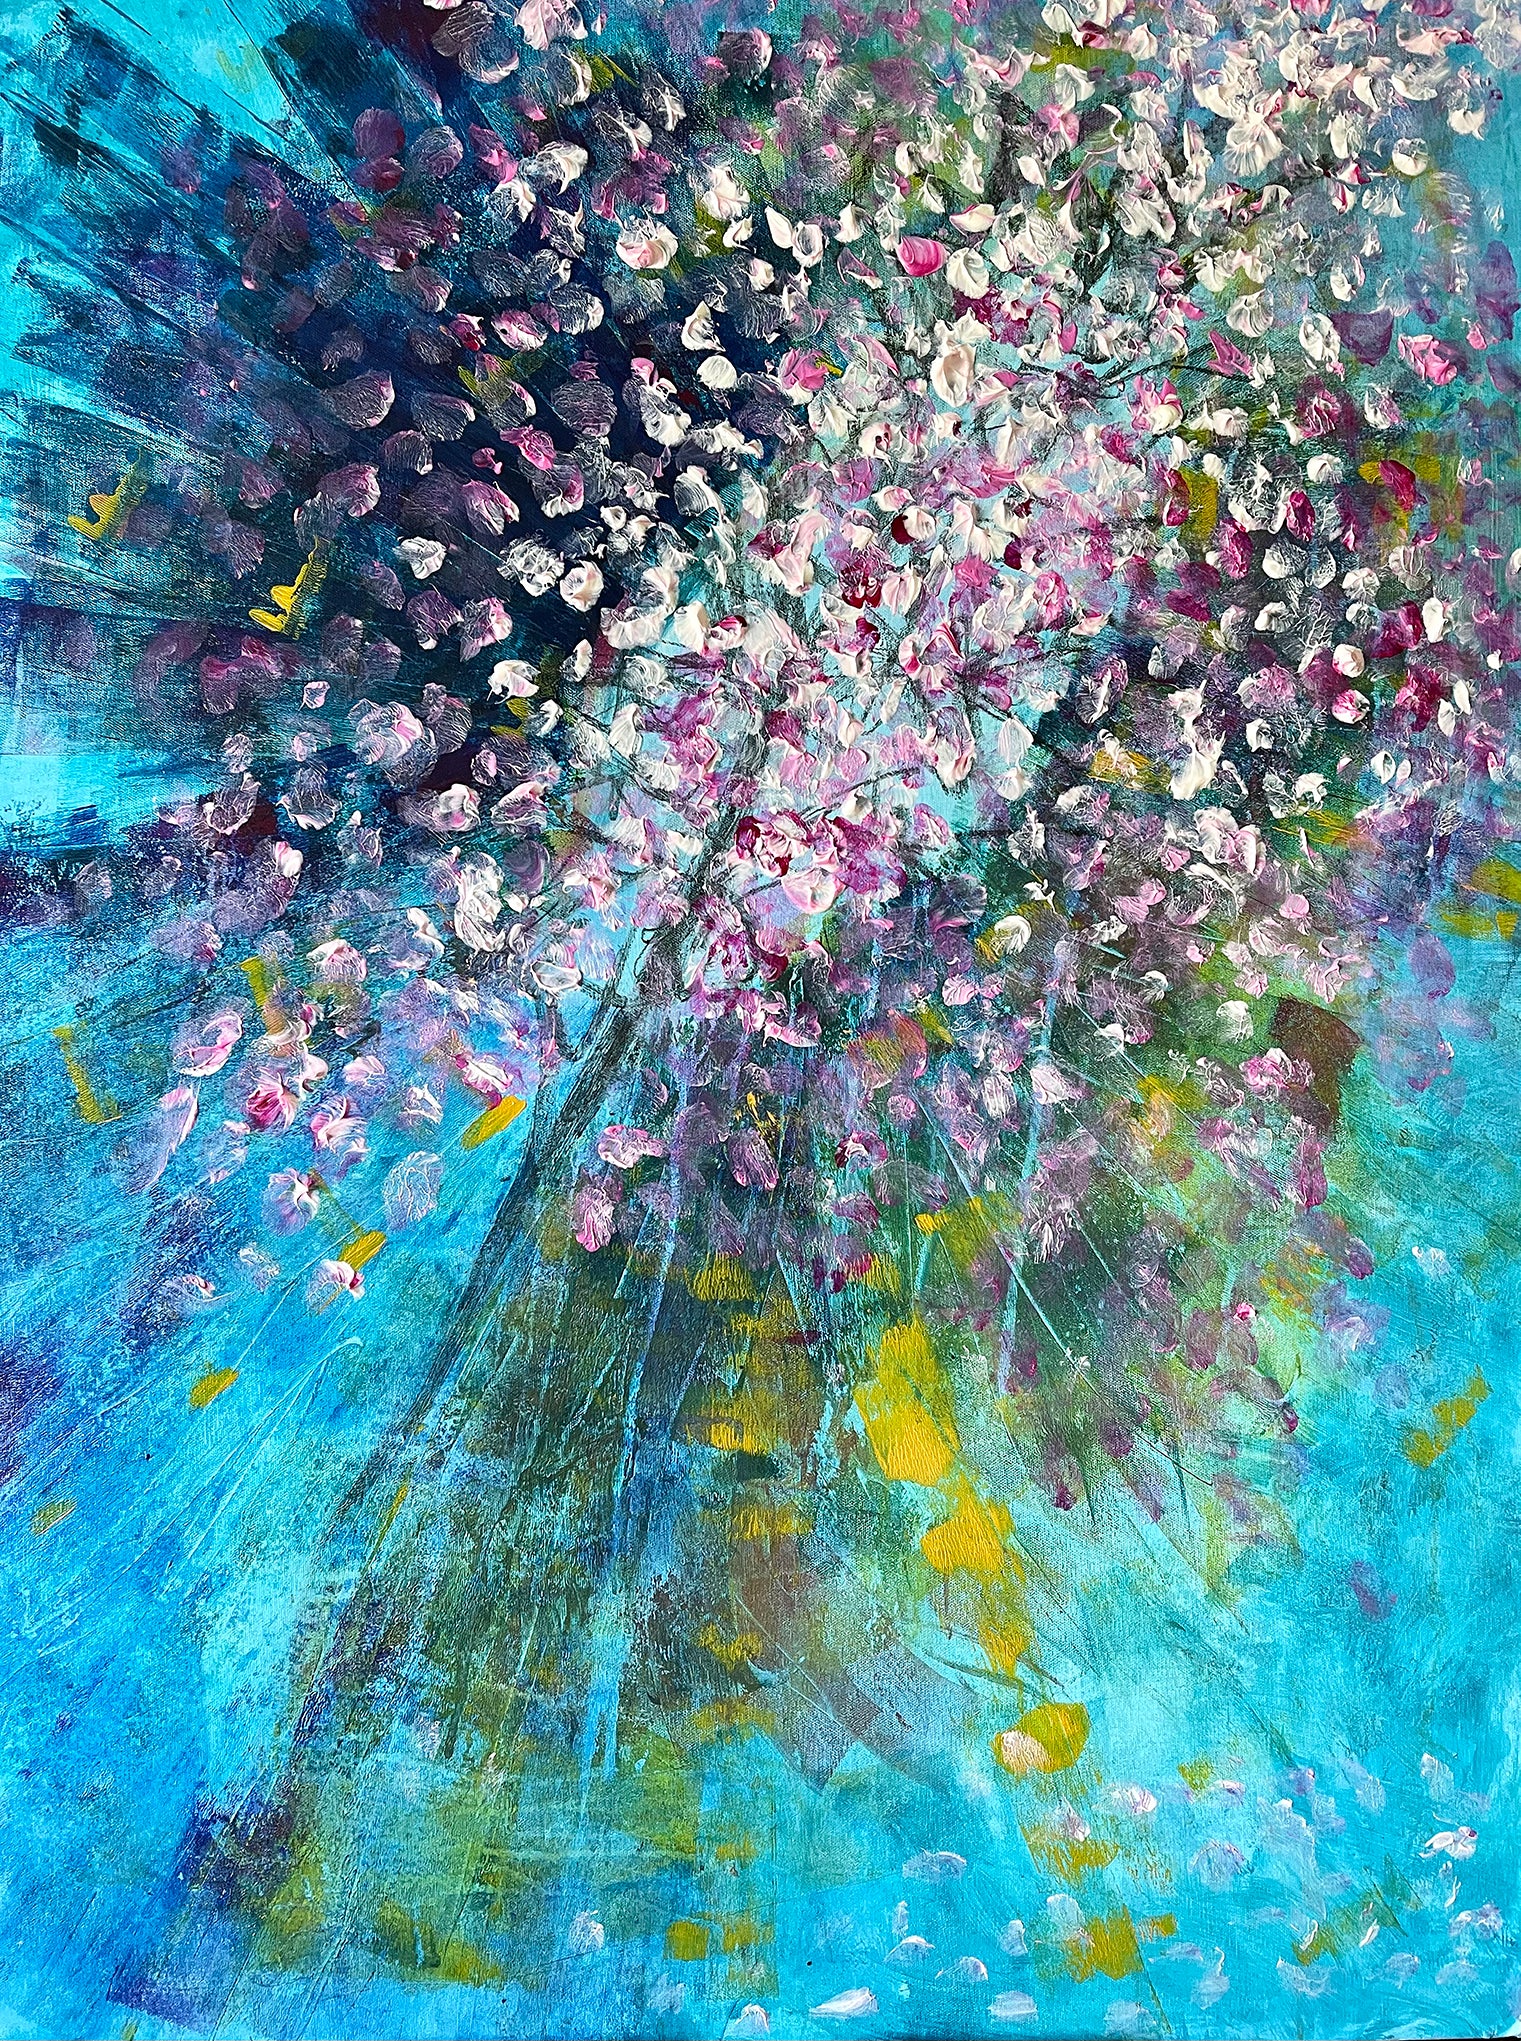 Pink and White bursts of color sprawl across an aquamarine, turquoise background. Bright accents of yellow dapple the piece. The whole composition looks as if a bouquet of flowers has been beautifully detonated.